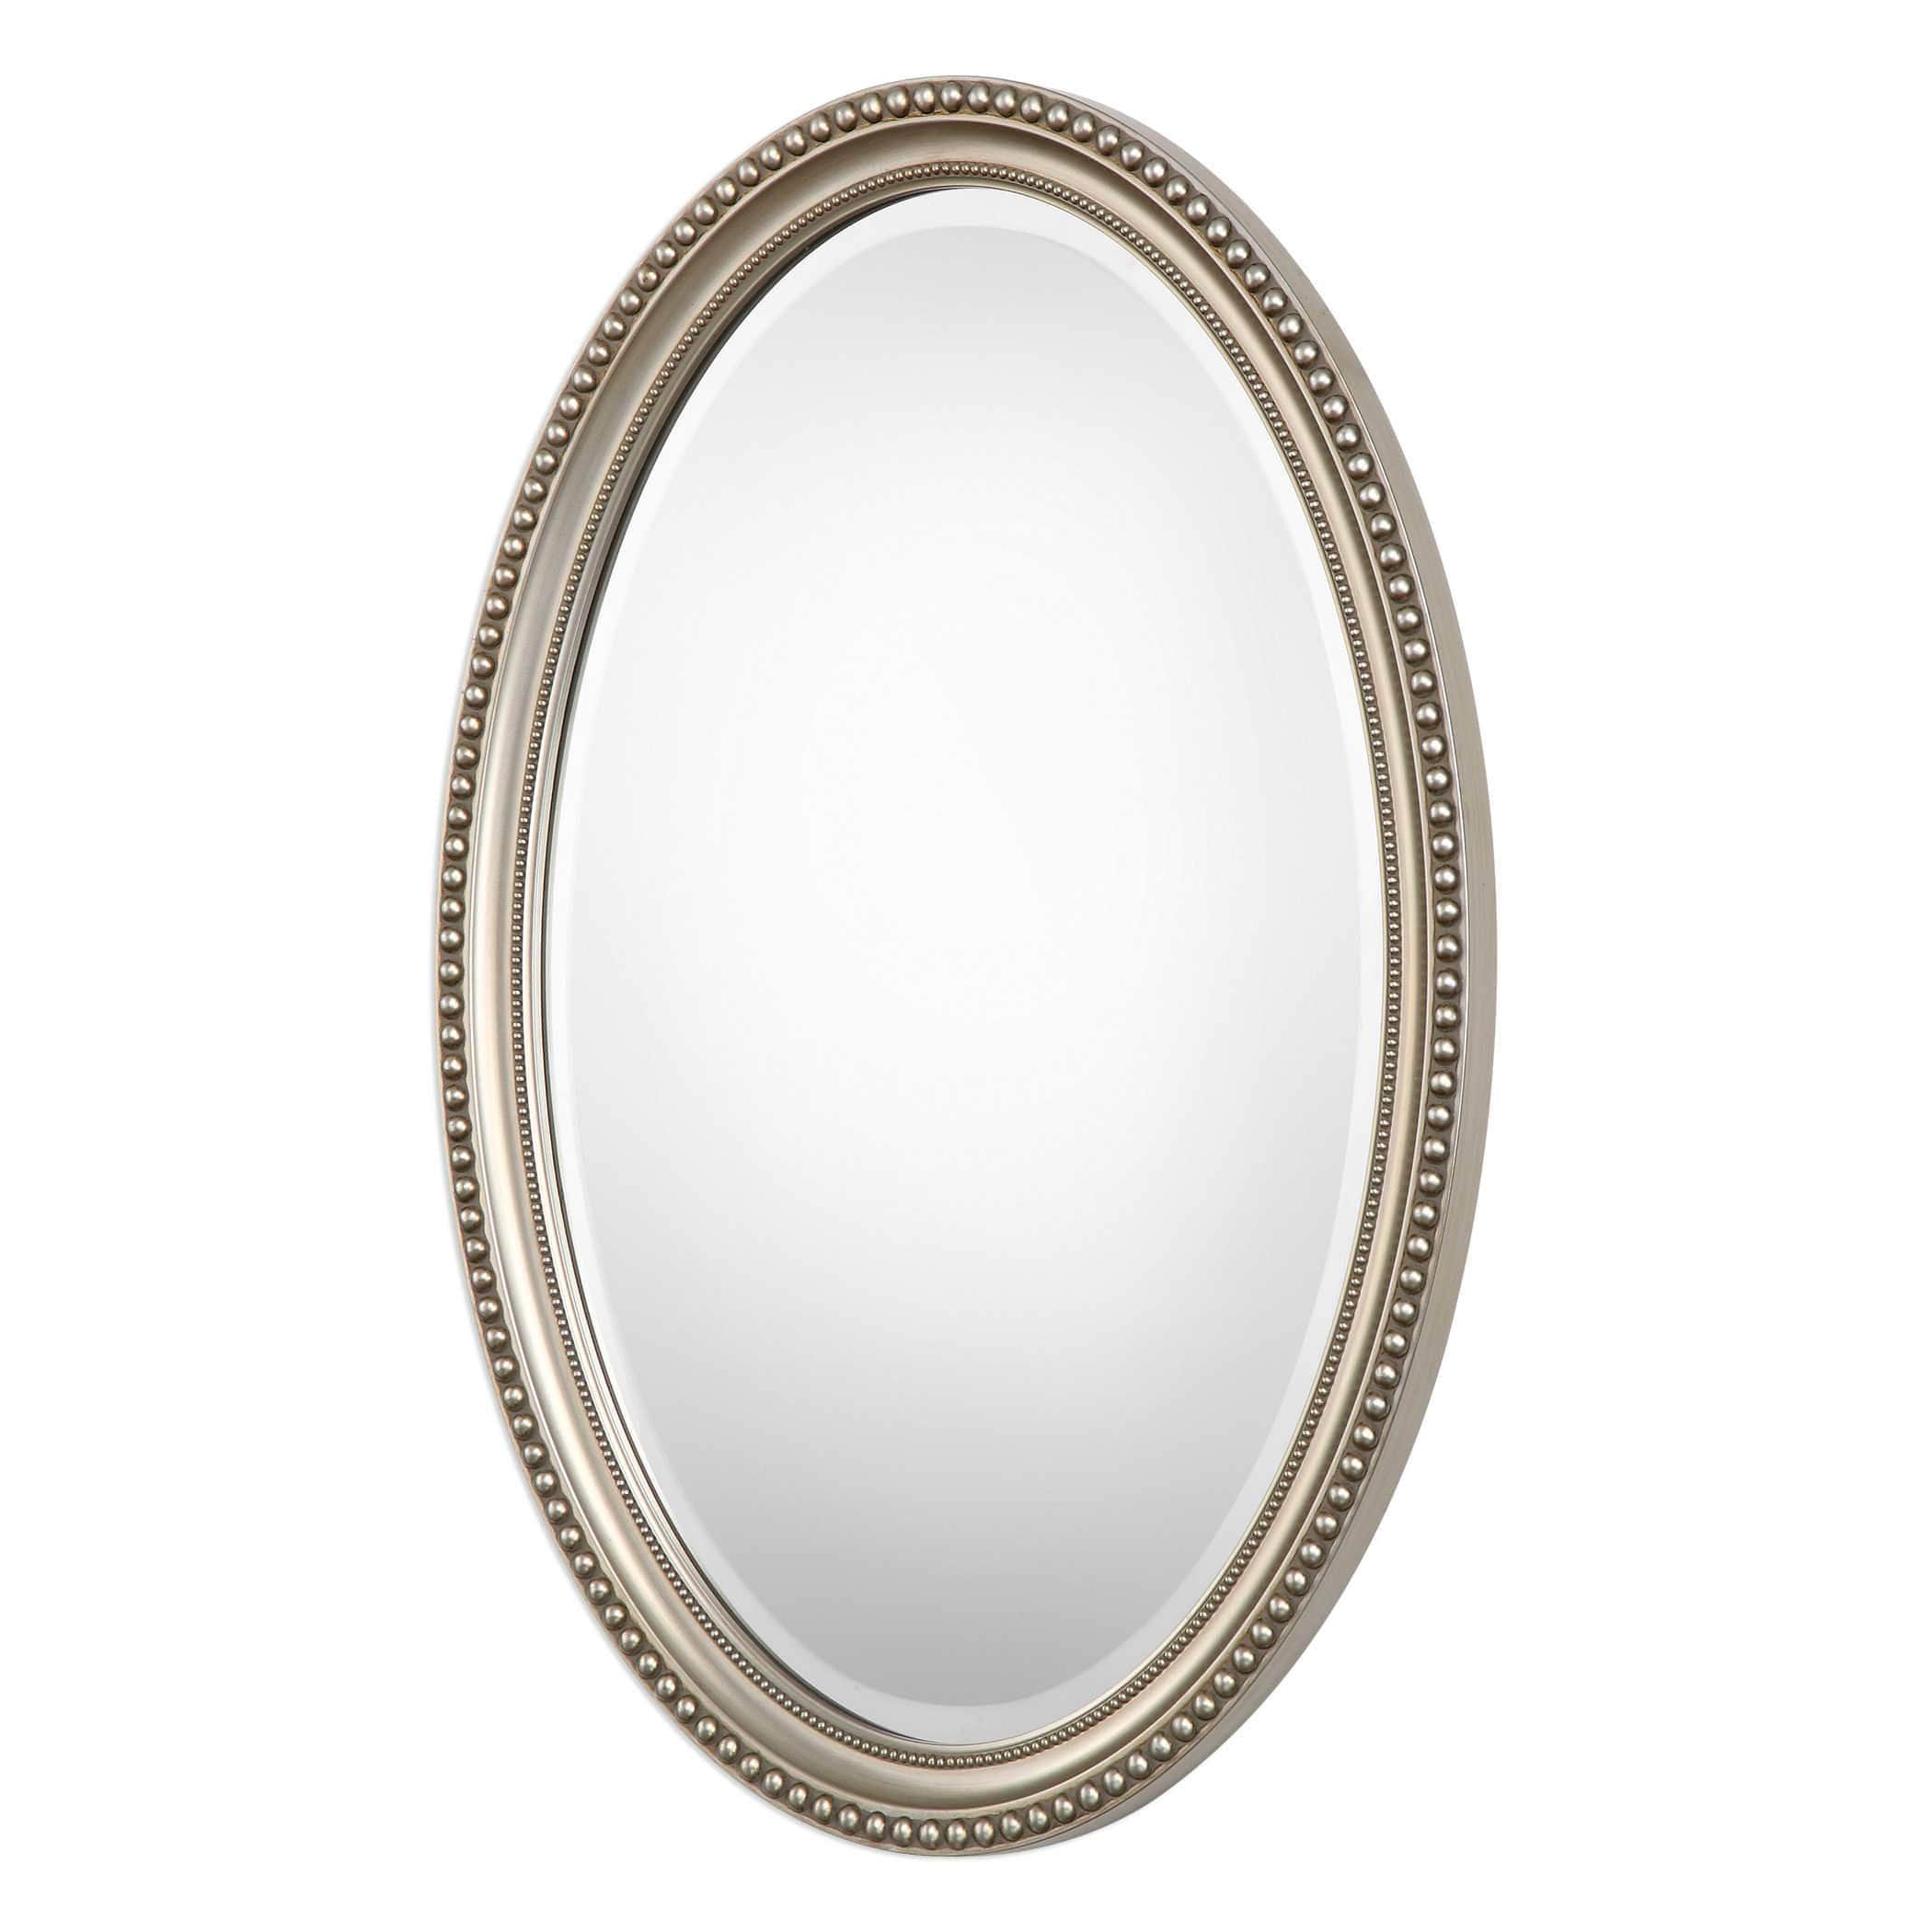 Narcissus Oval Mirror Uttermost